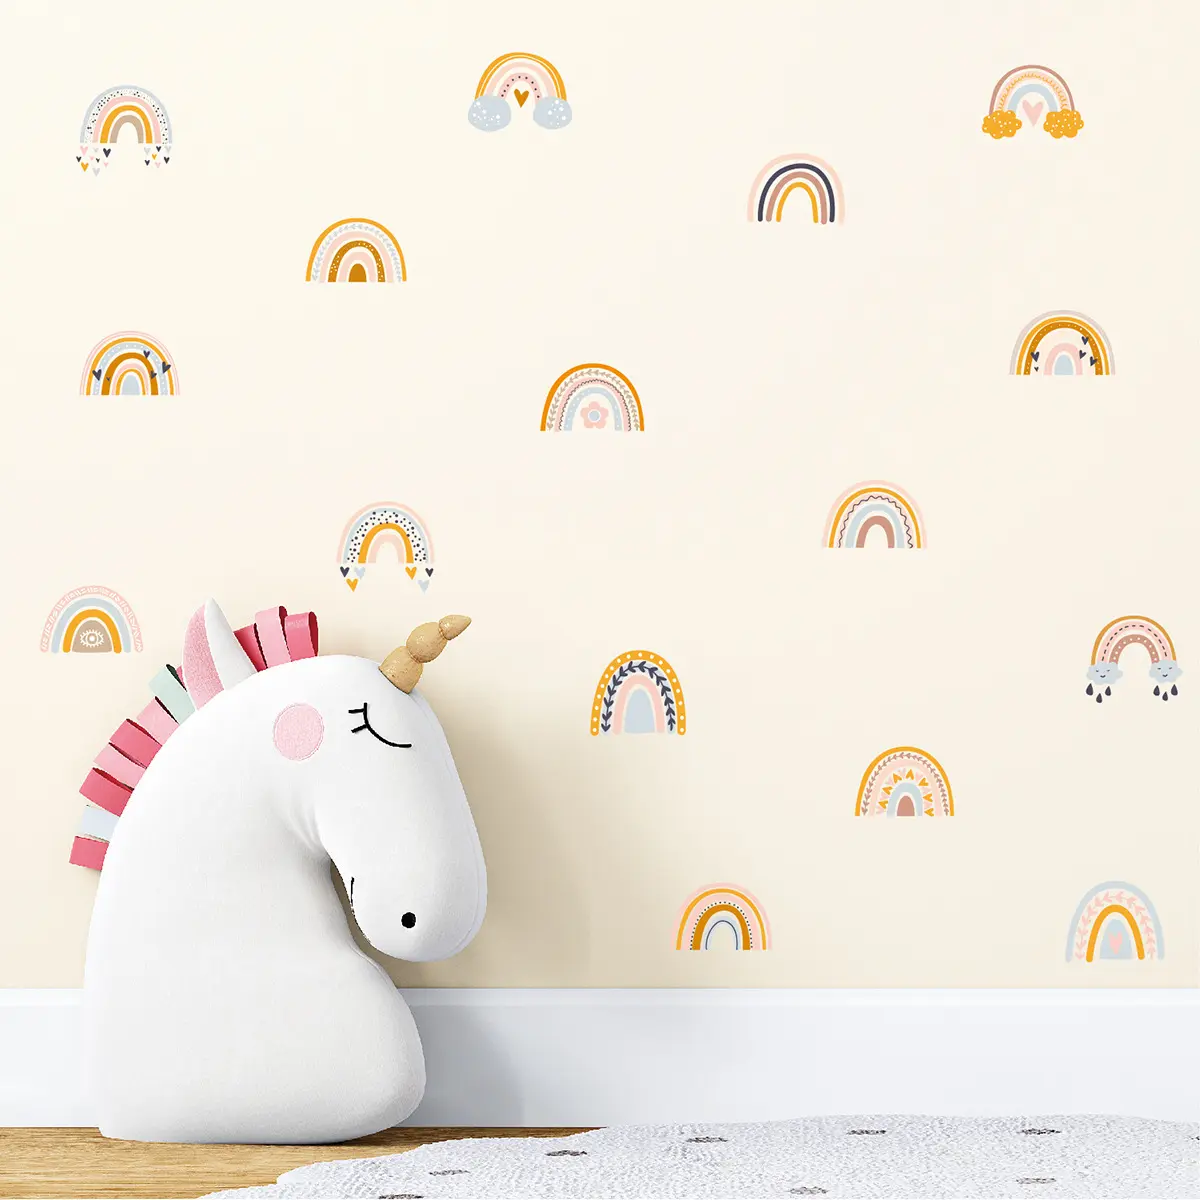 Rainbow Wall Decals Peel and Stick Self Adhesive Colorful Rainbow Wall Sticker for Girls Bedroom Decor Kids Nursery Room